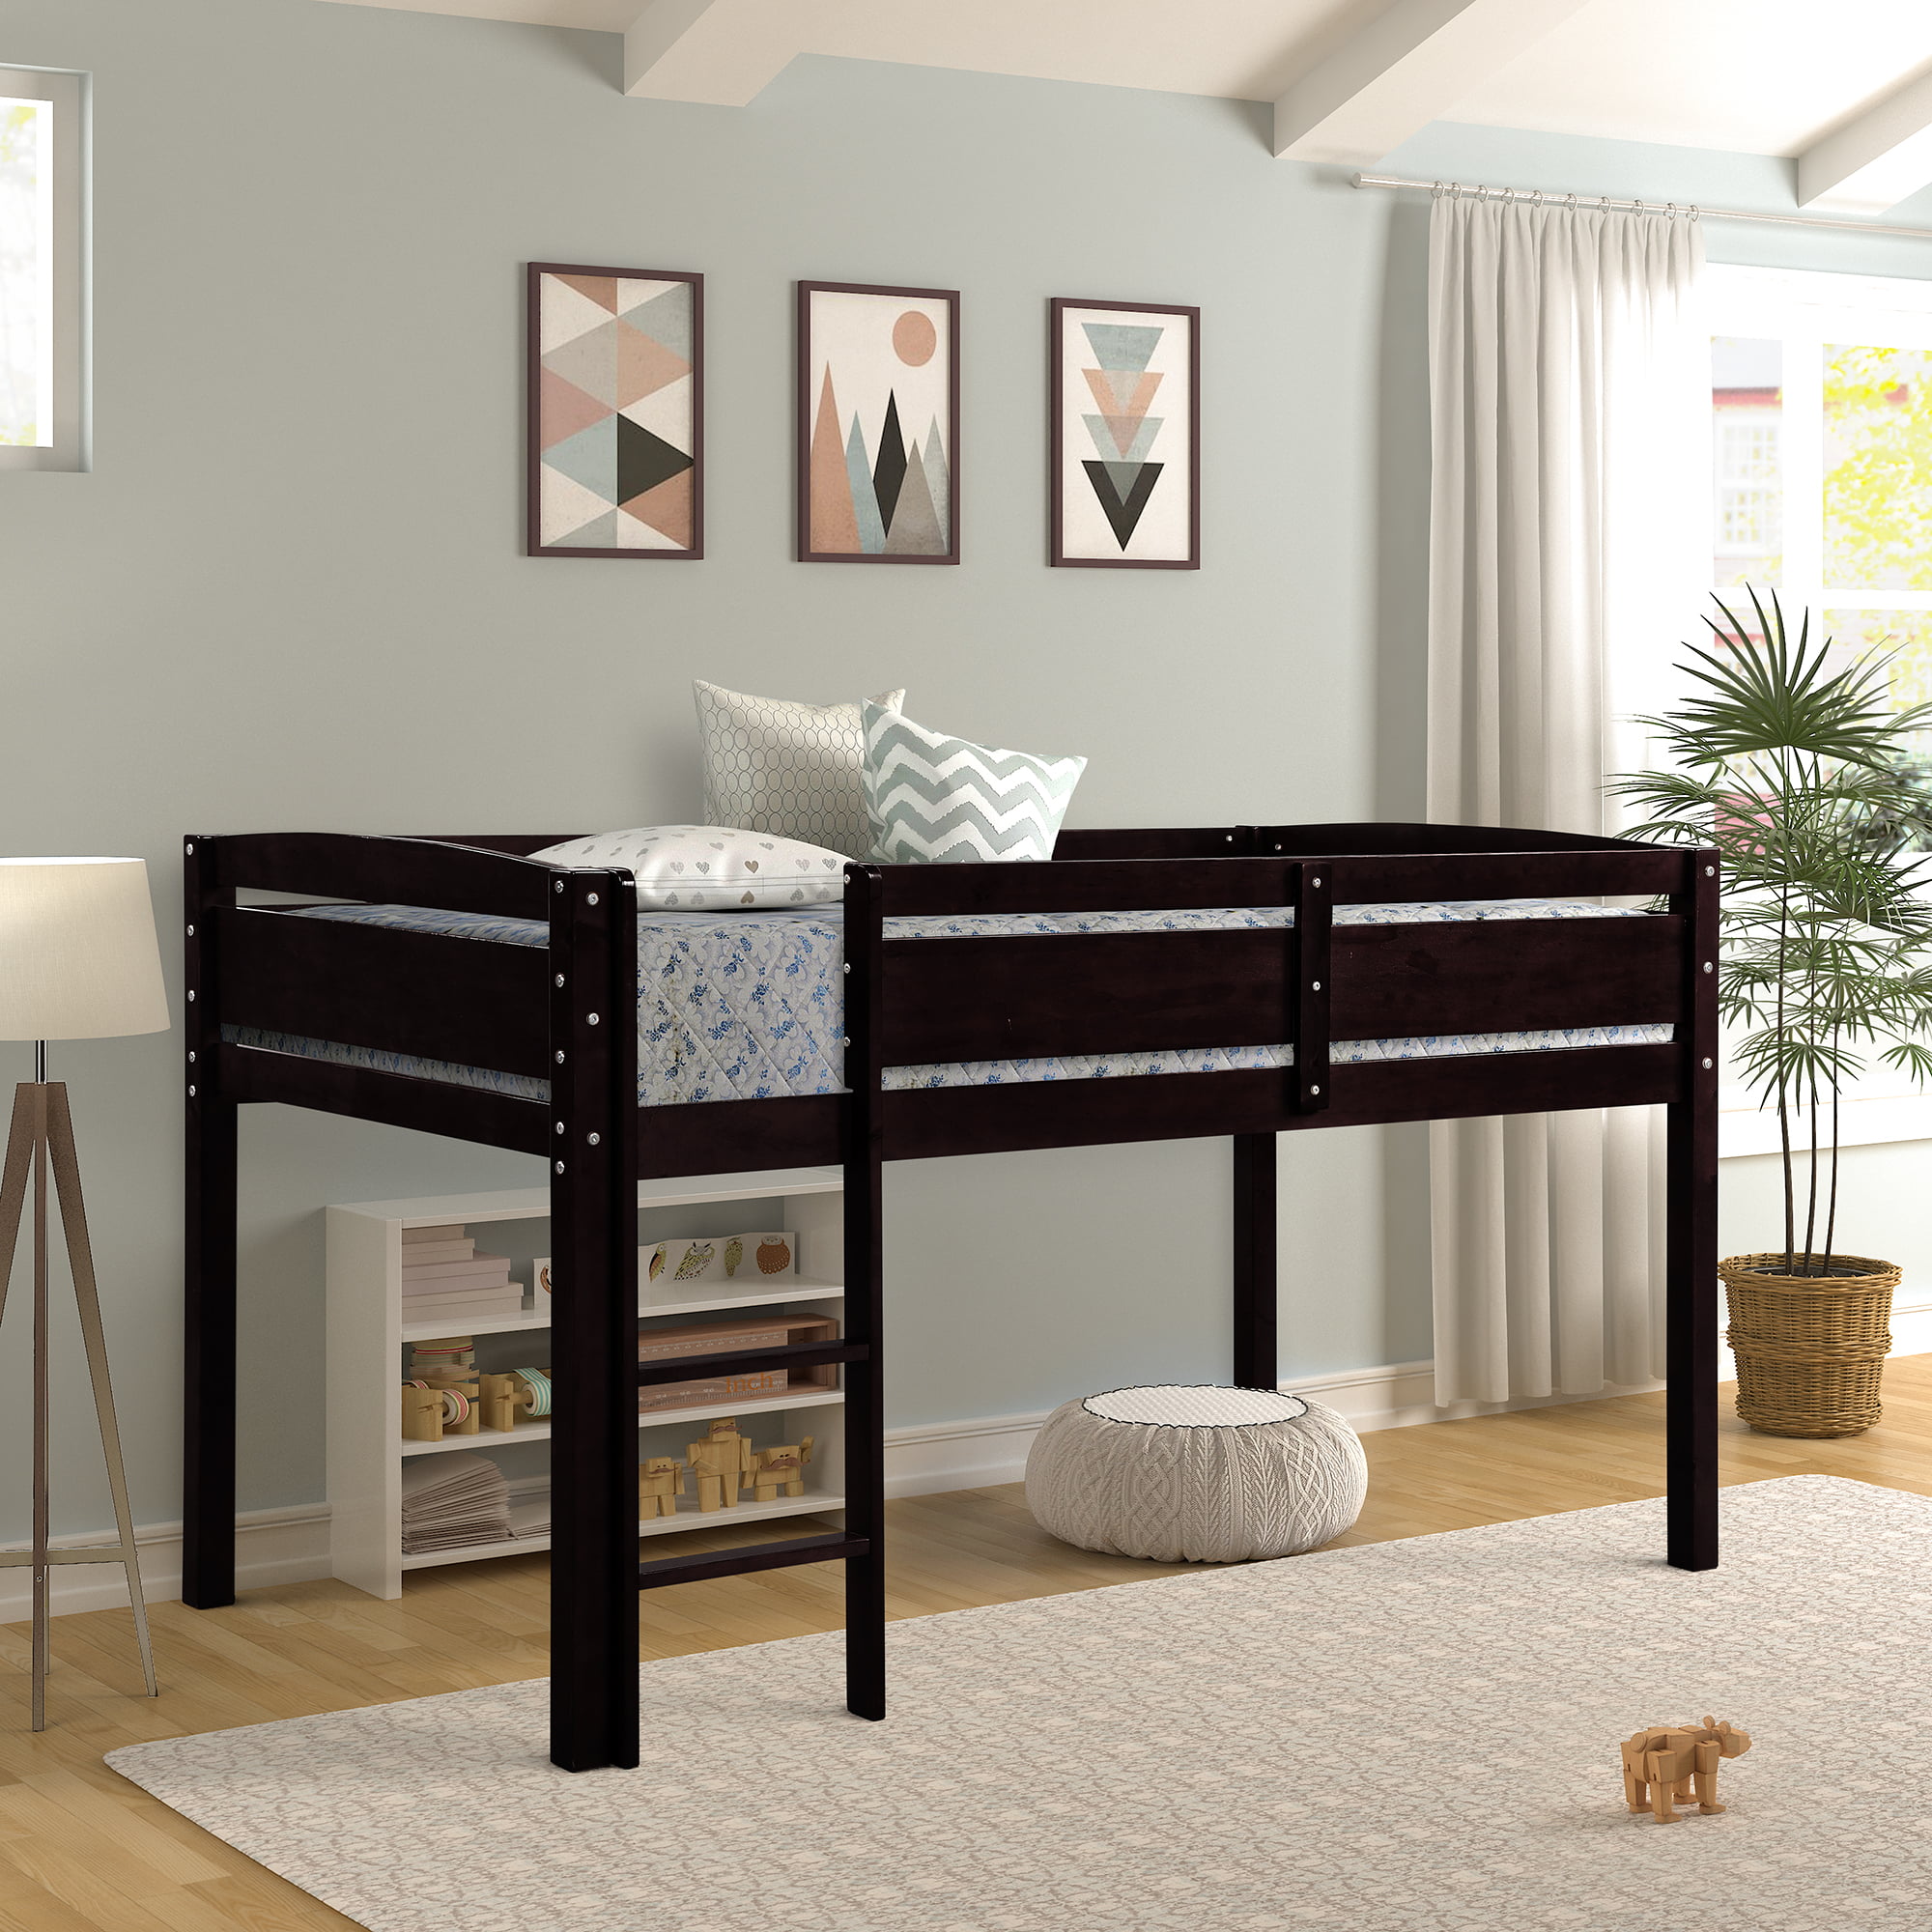 Kids Loft Bed with Ladder and Guard Rail, URHOMEPRO Heavy Duty Wood